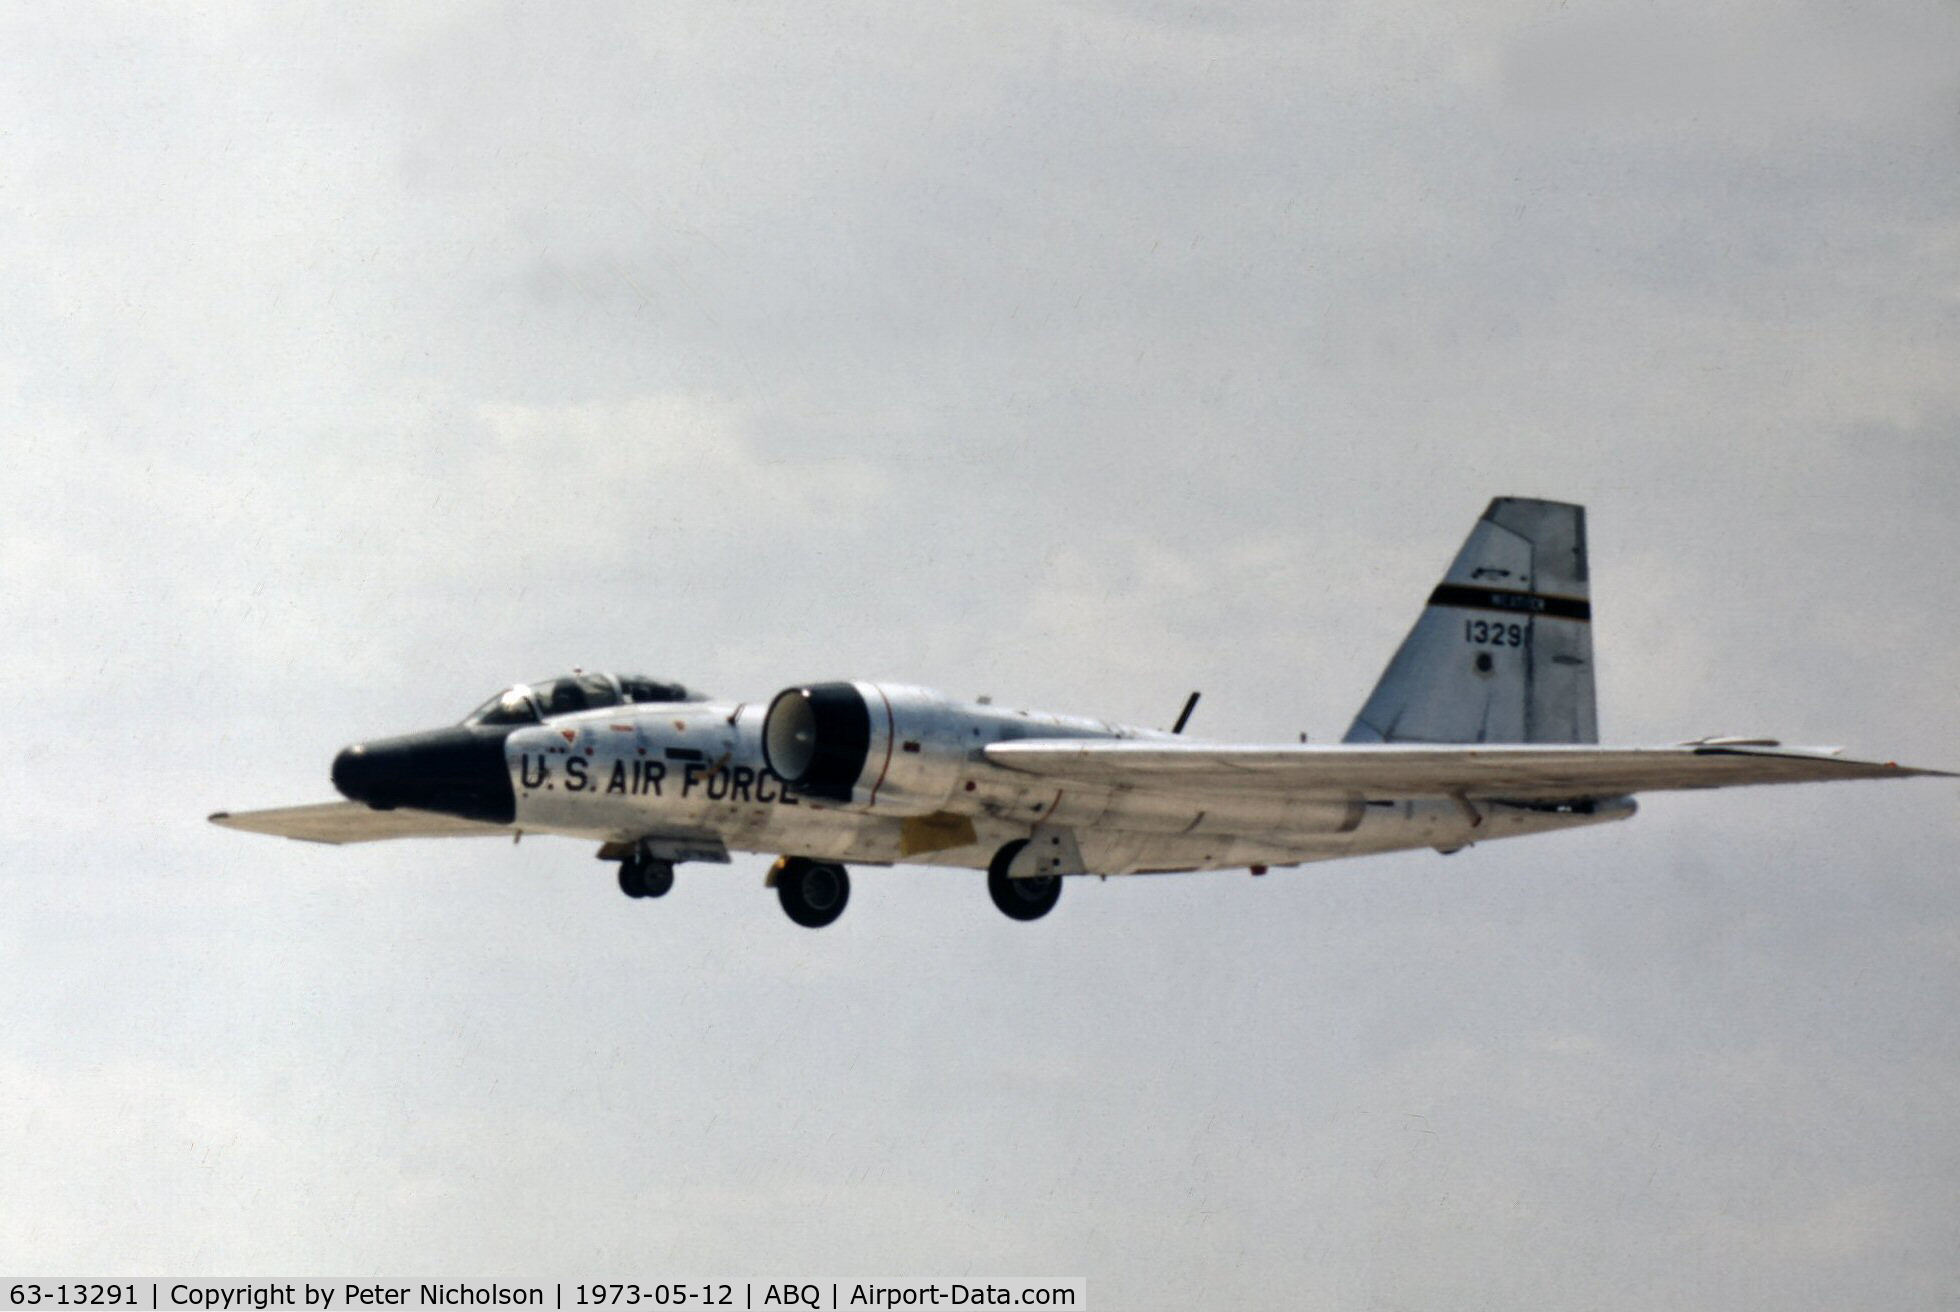 63-13291, 1963 Martin WB-57F Canberra C/N 63-13291, WB-57F of the 58th Weather Research Squadron at Kirtland AFB on final approach to Albuquerque in May 1973.